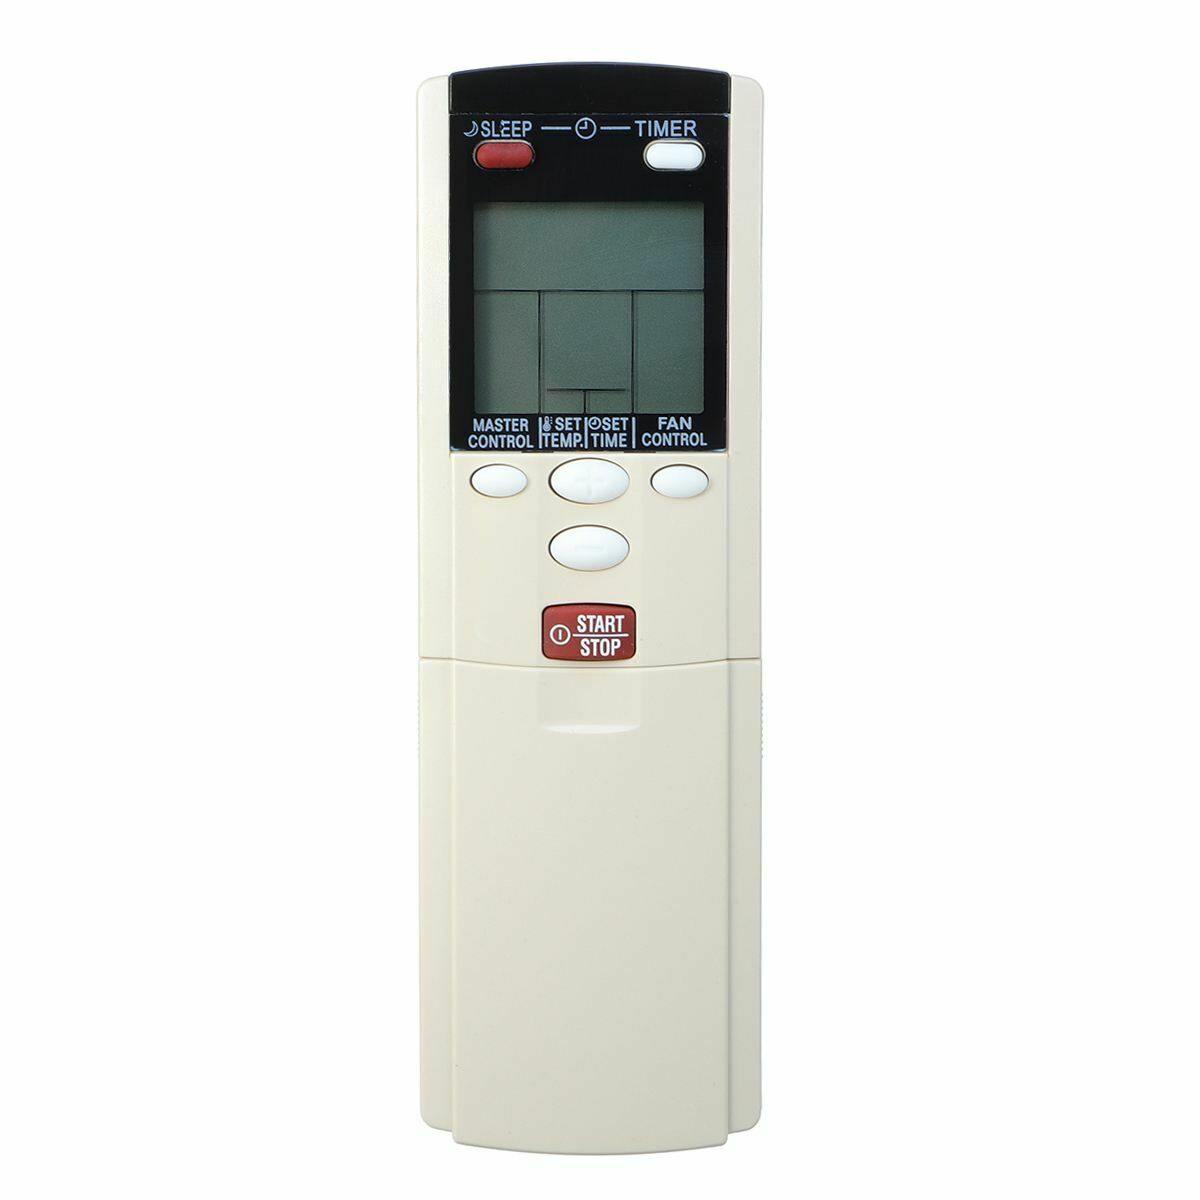 Air Con Remote for Friedrich Model: ARDL12 - China Air Conditioner Remotes :: Cheapest AC Remote Solutions